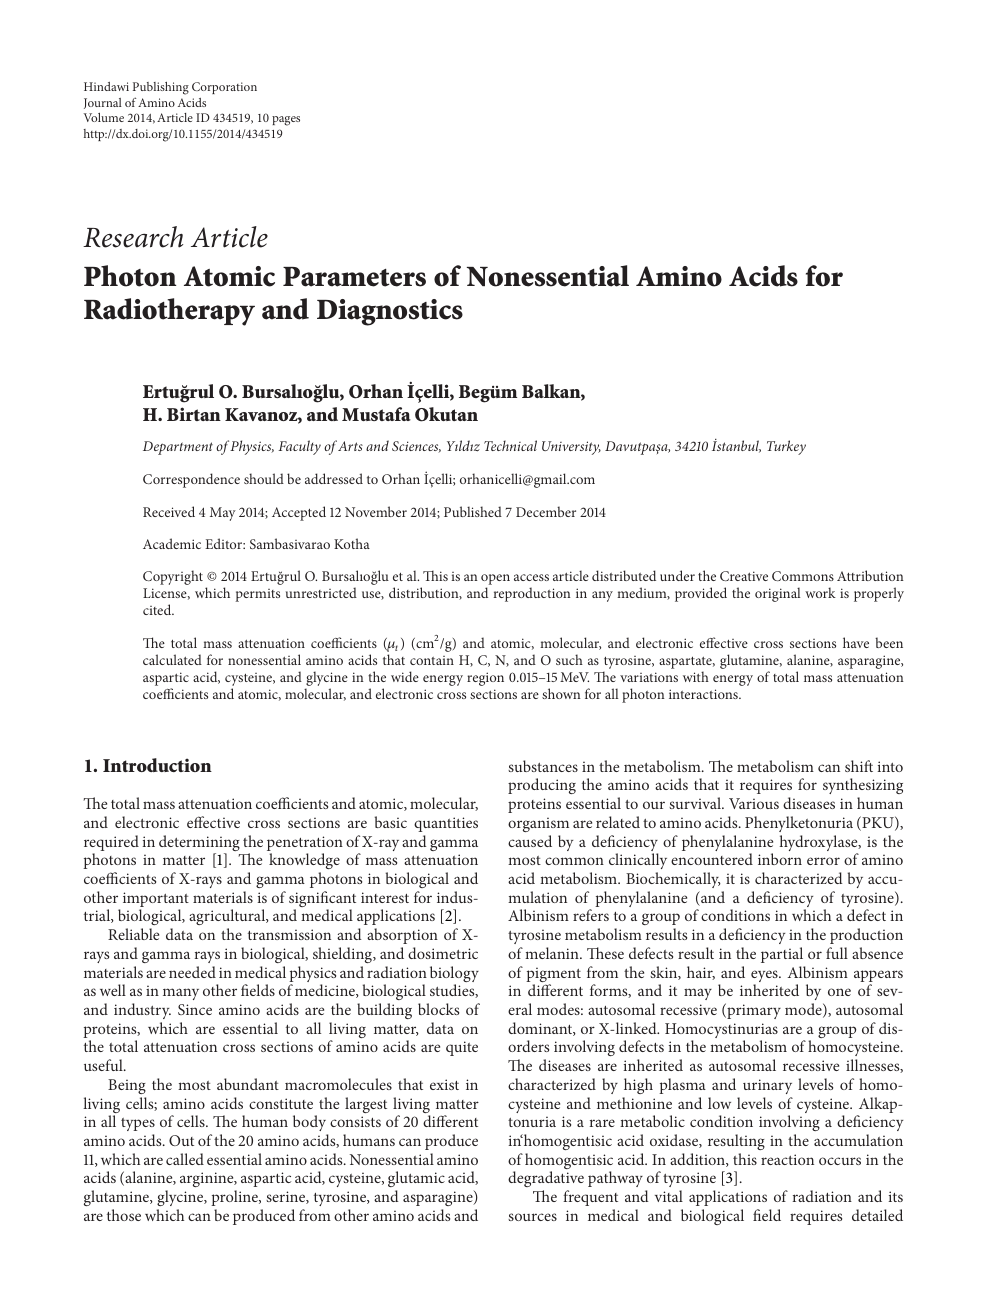 Photon Atomic Parameters Of Nonessential Amino Acids For Radiotherapy And Diagnostics Topic Of Research Paper In Physical Sciences Download Scholarly Article Pdf And Read For Free On Cyberleninka Open Science Hub